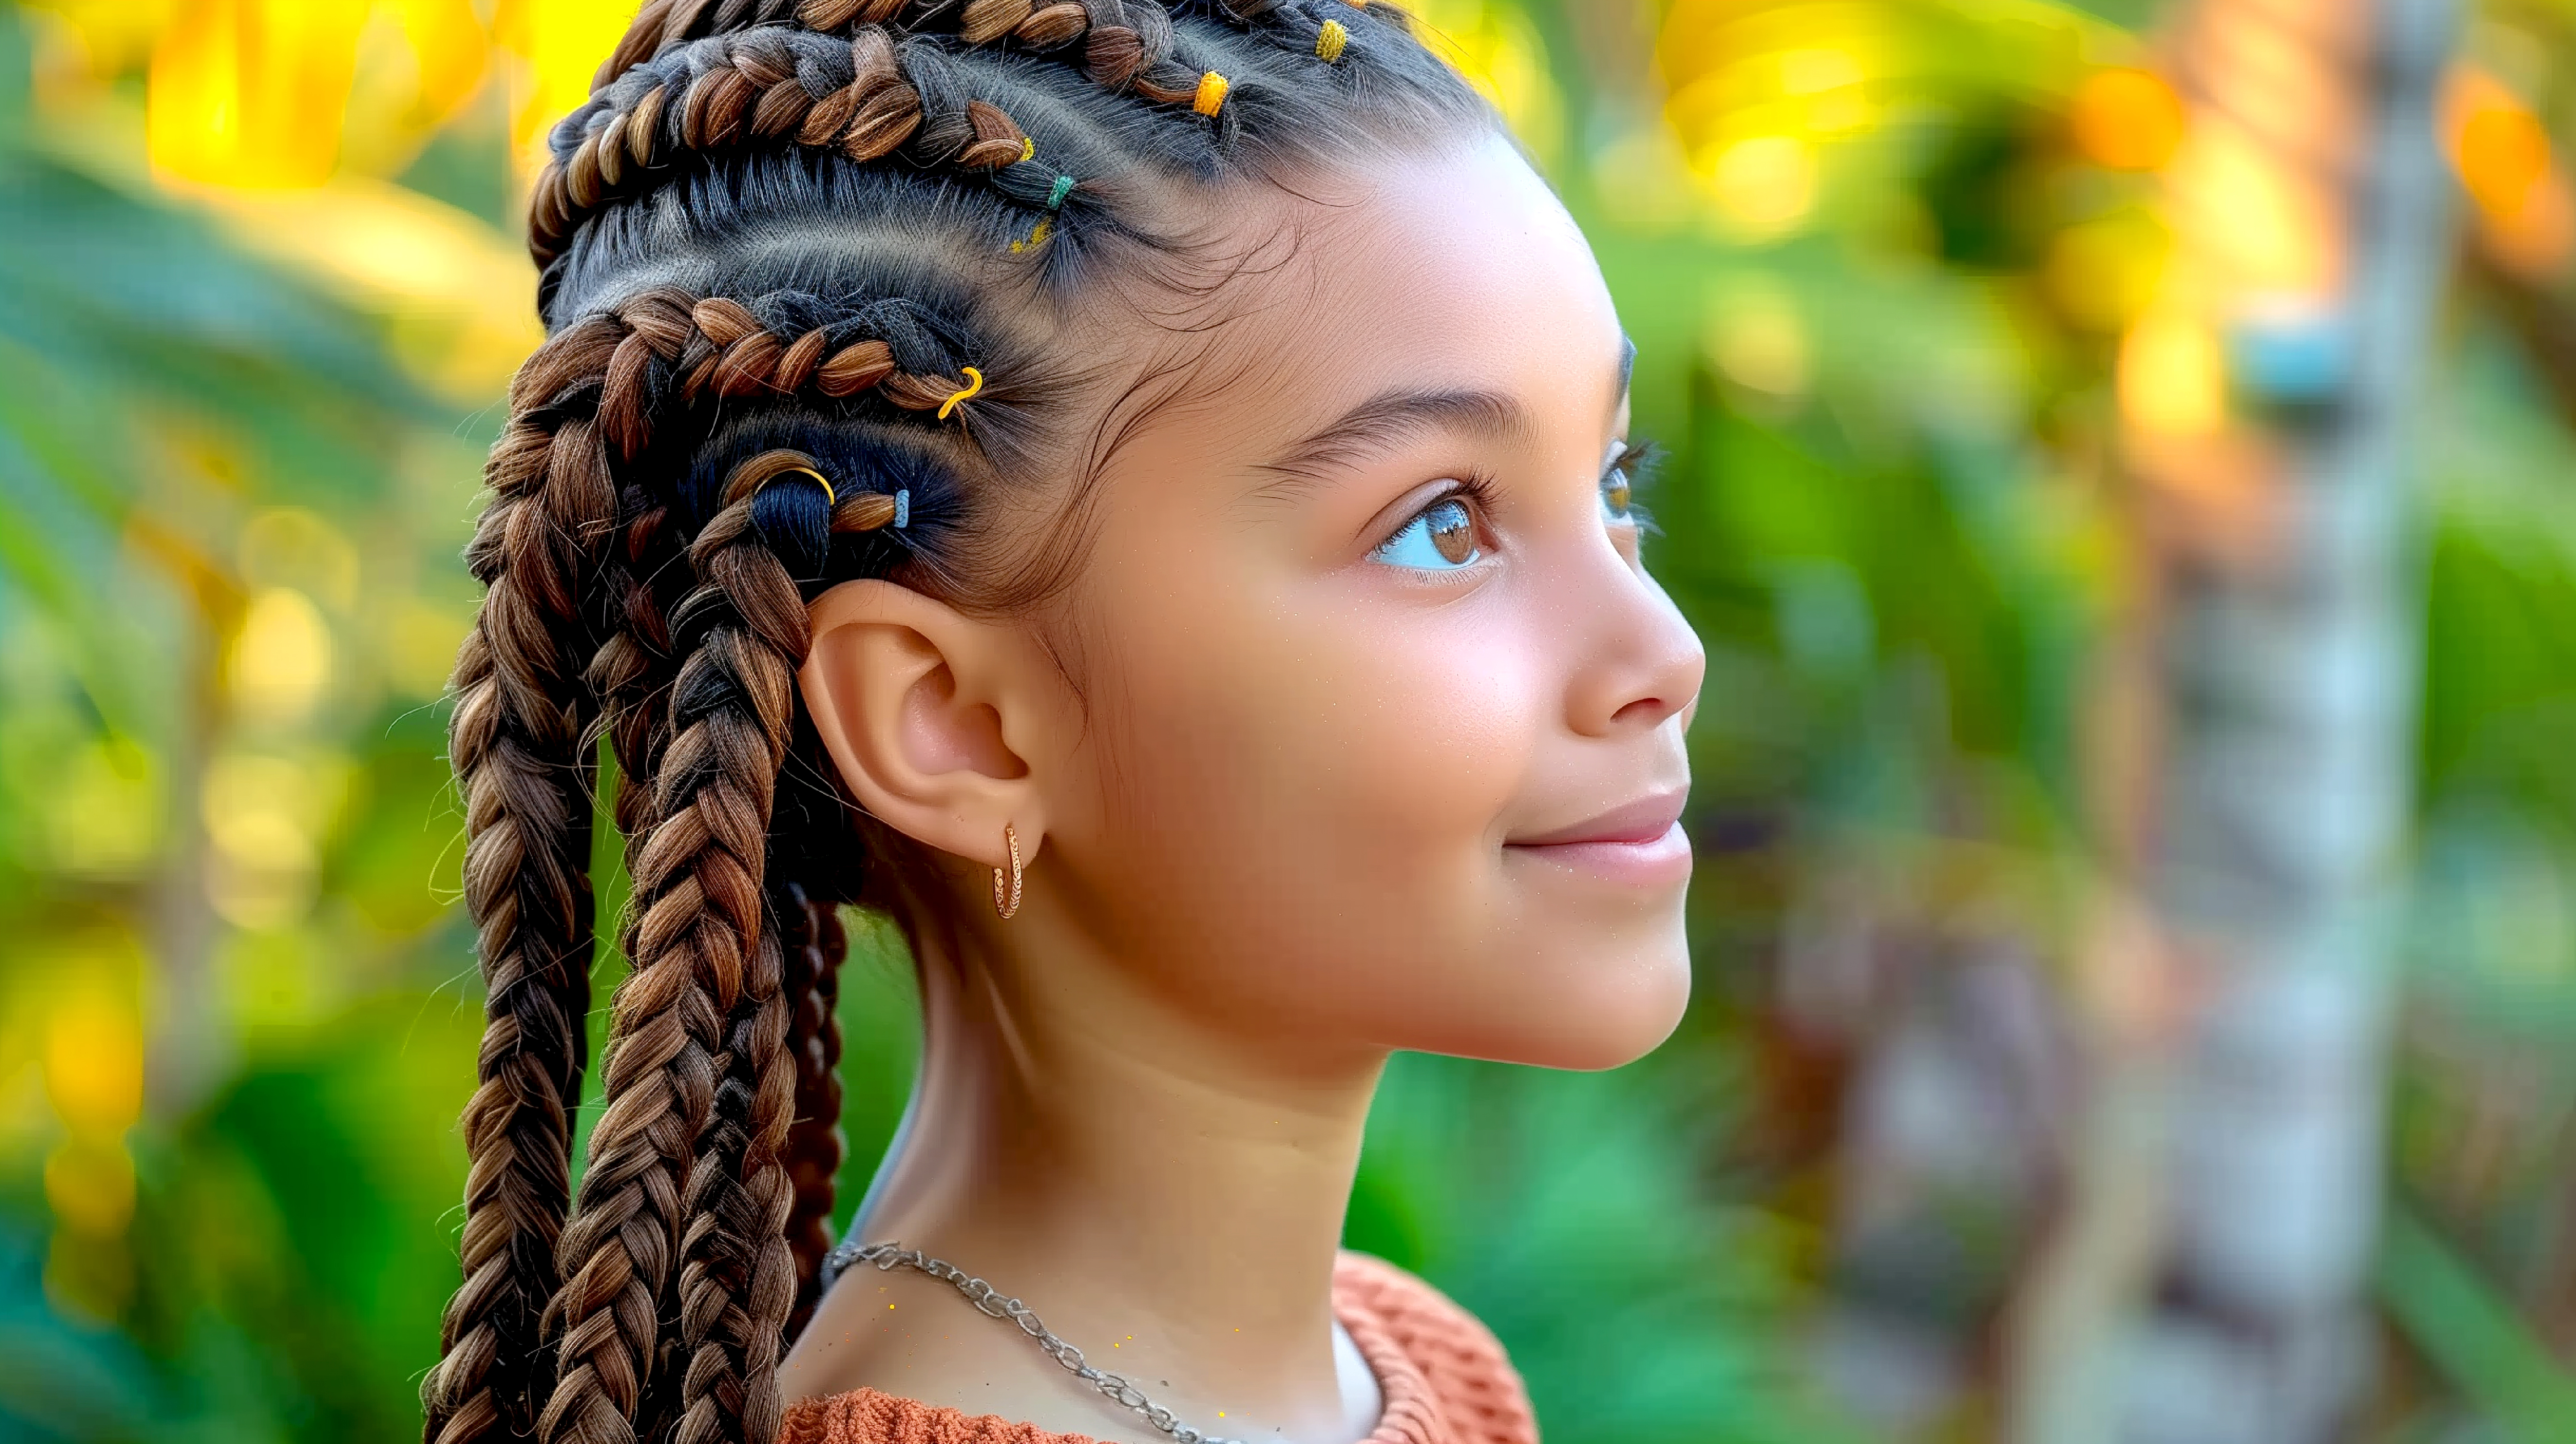 young-person-portrait-photorealistic-style-with-braids.jpg